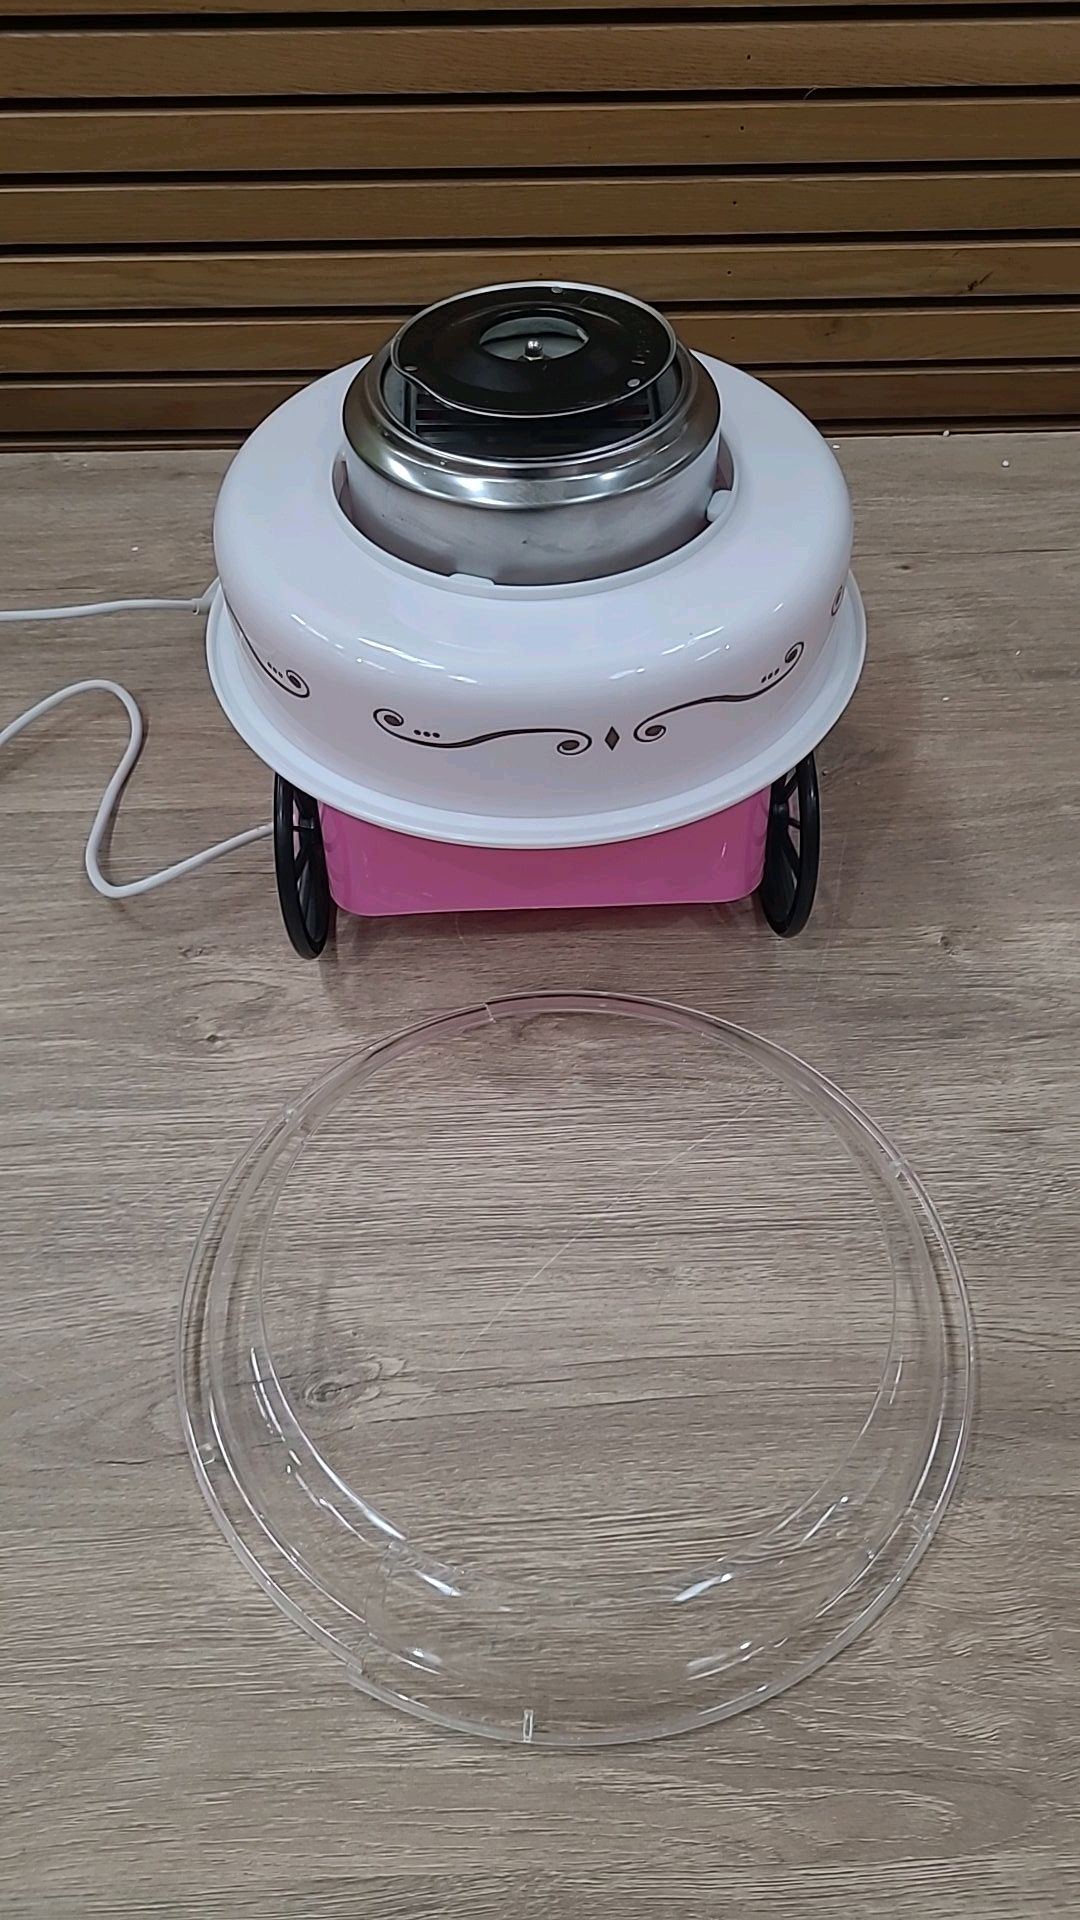 COTTON CANDY MAKER - Image 2 of 2